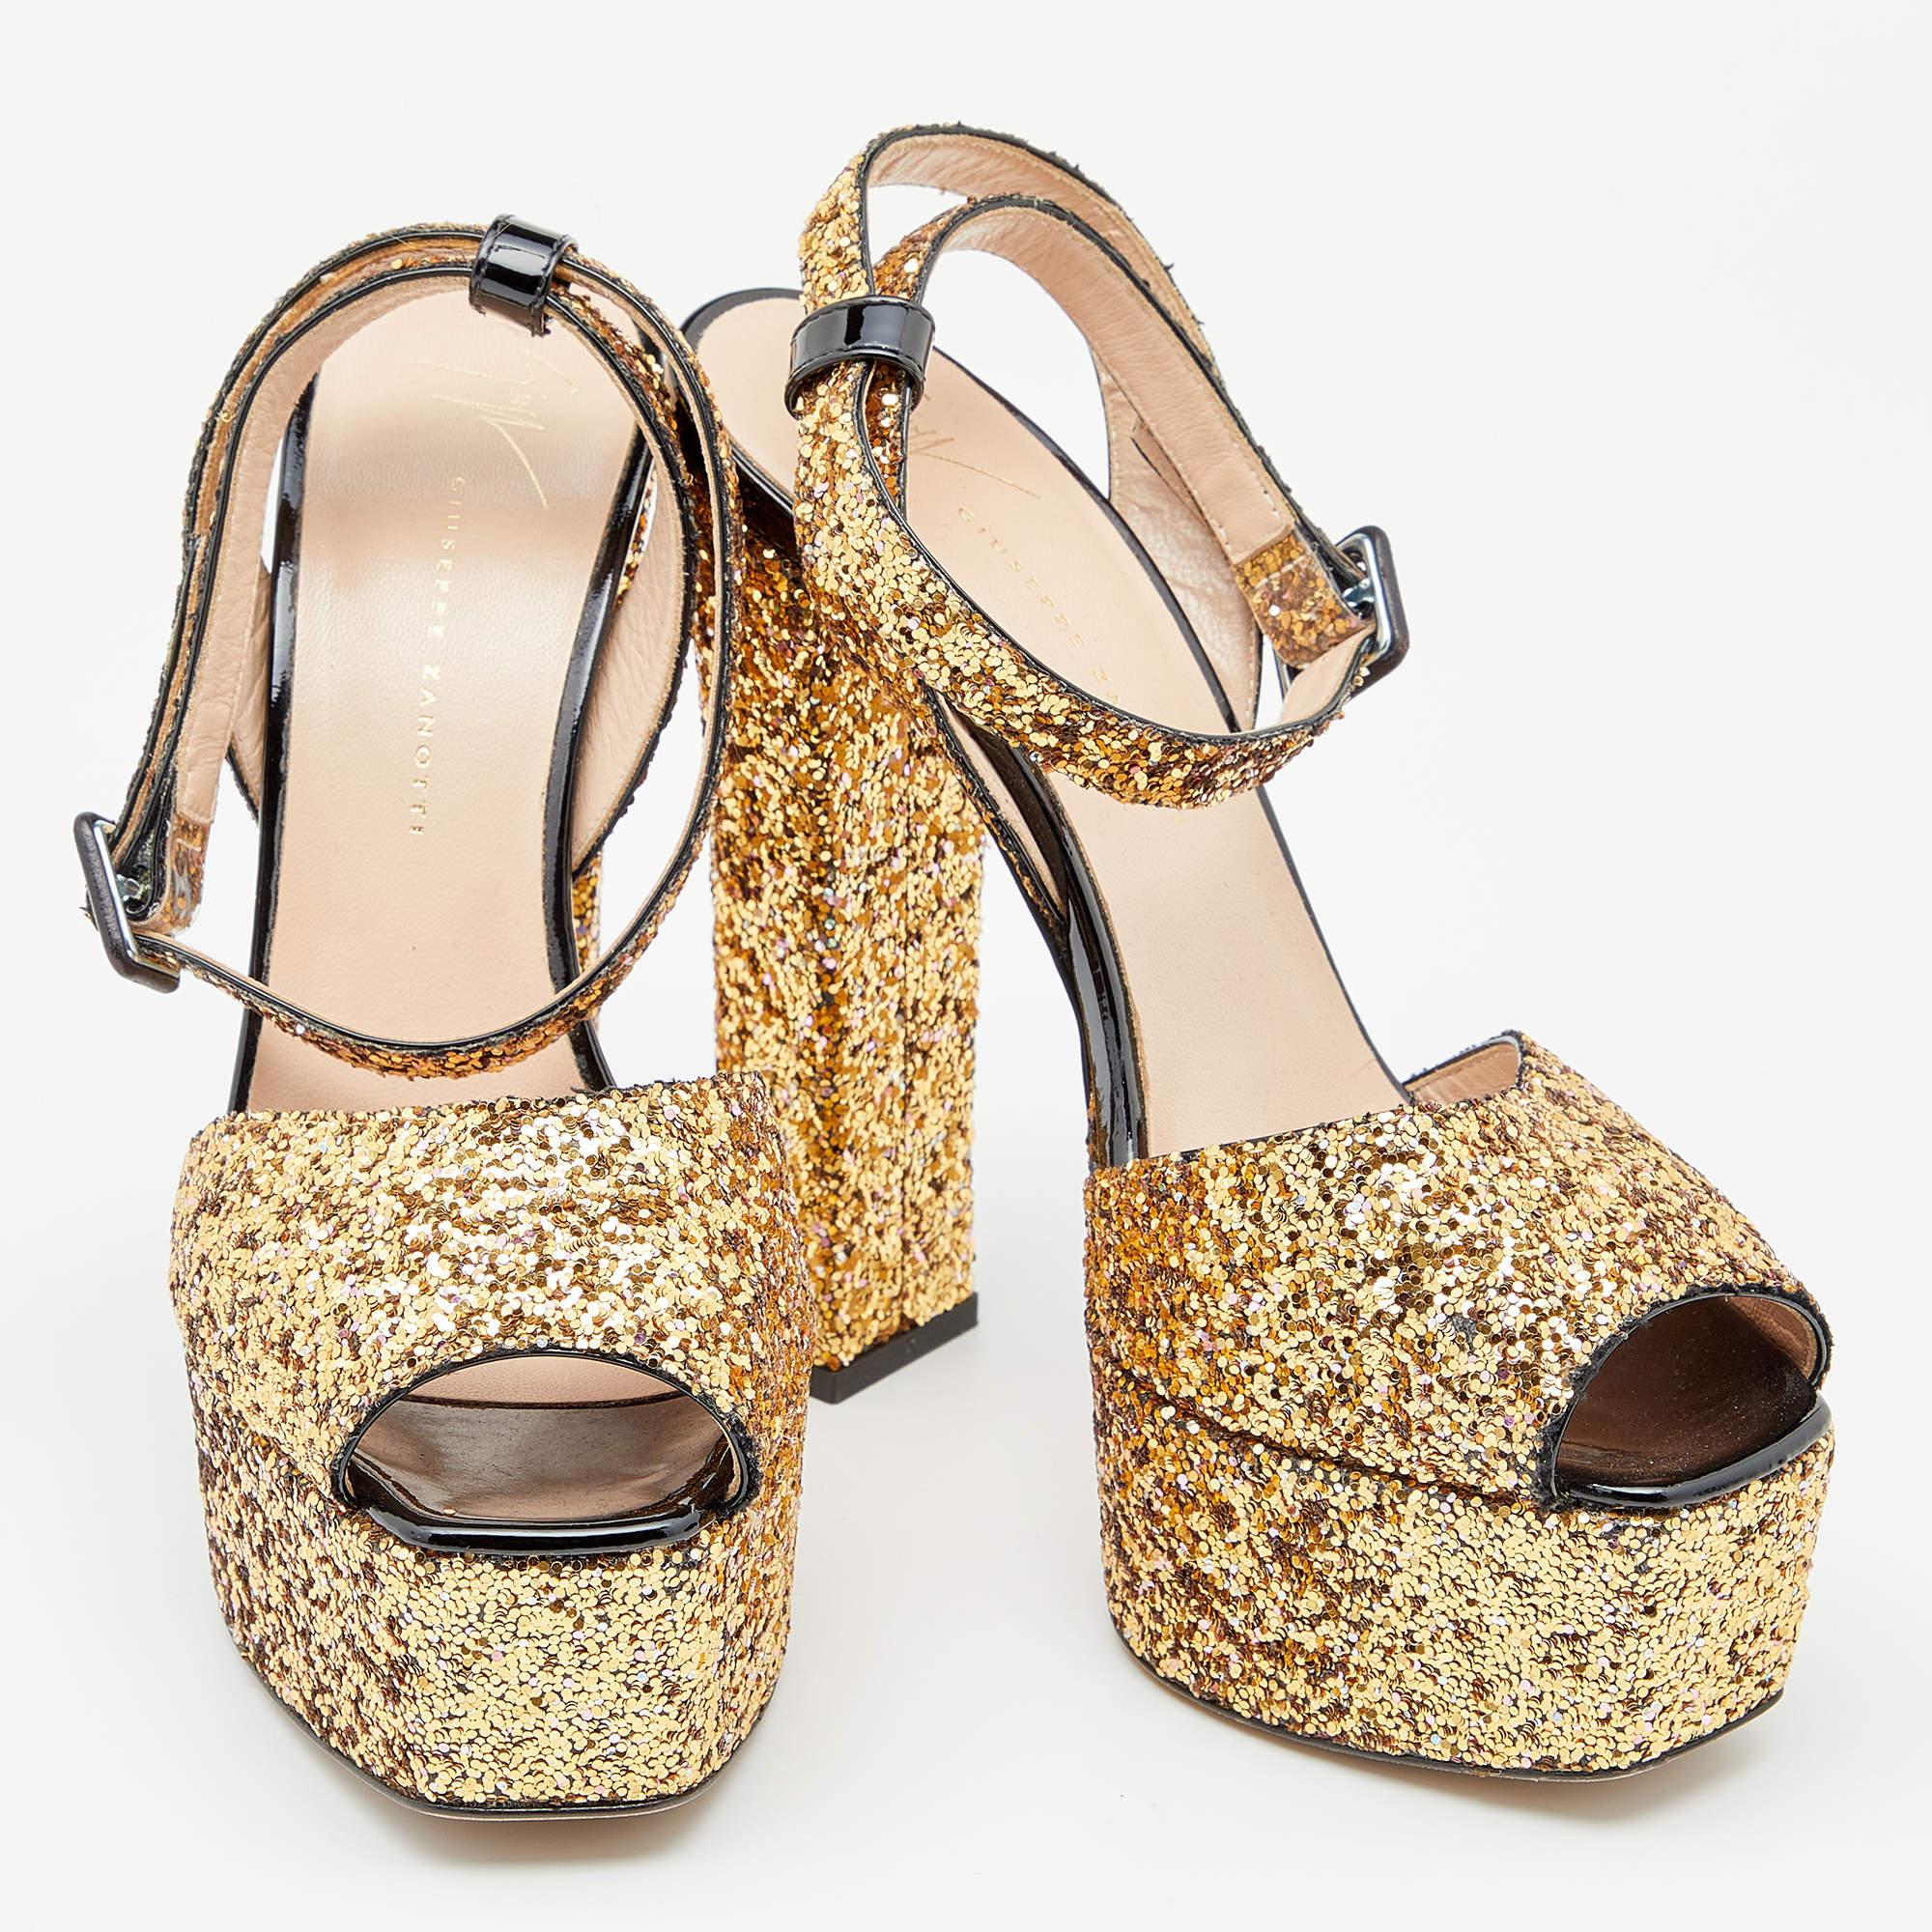 Let your ensemble stand out and make you shine as you wear these stunning sandals from Giuseppe Zanotti. They are brilliantly designed using gold coarse glitter on the exterior, granting them an ultra-luxurious look. Additionally, their sturdy shape